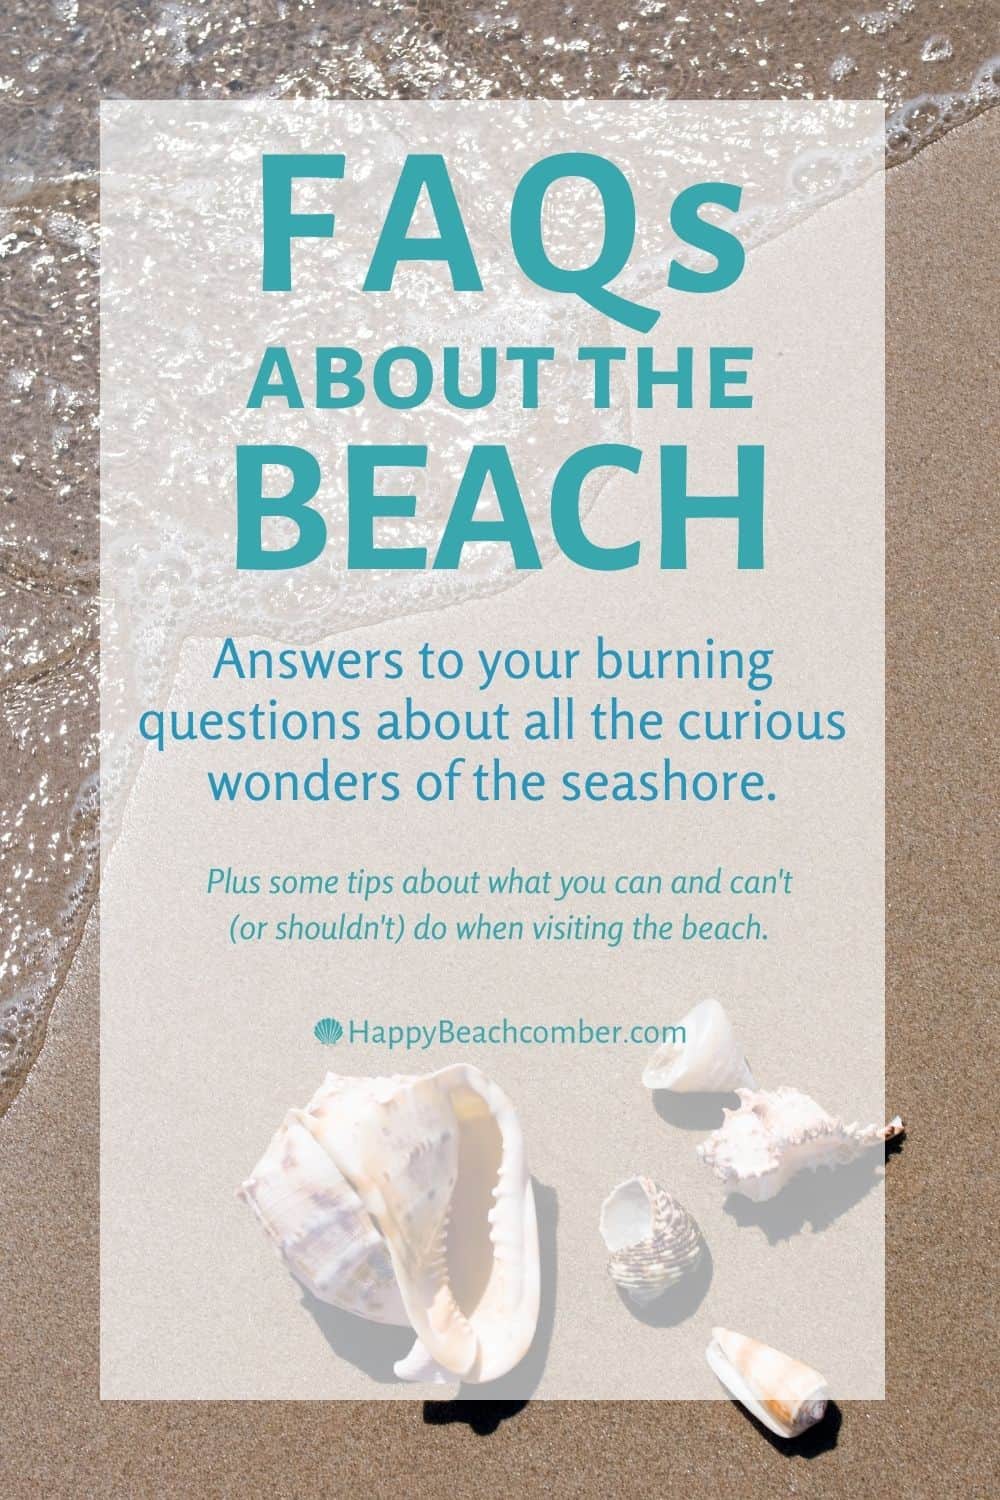 FAQs About the Beach